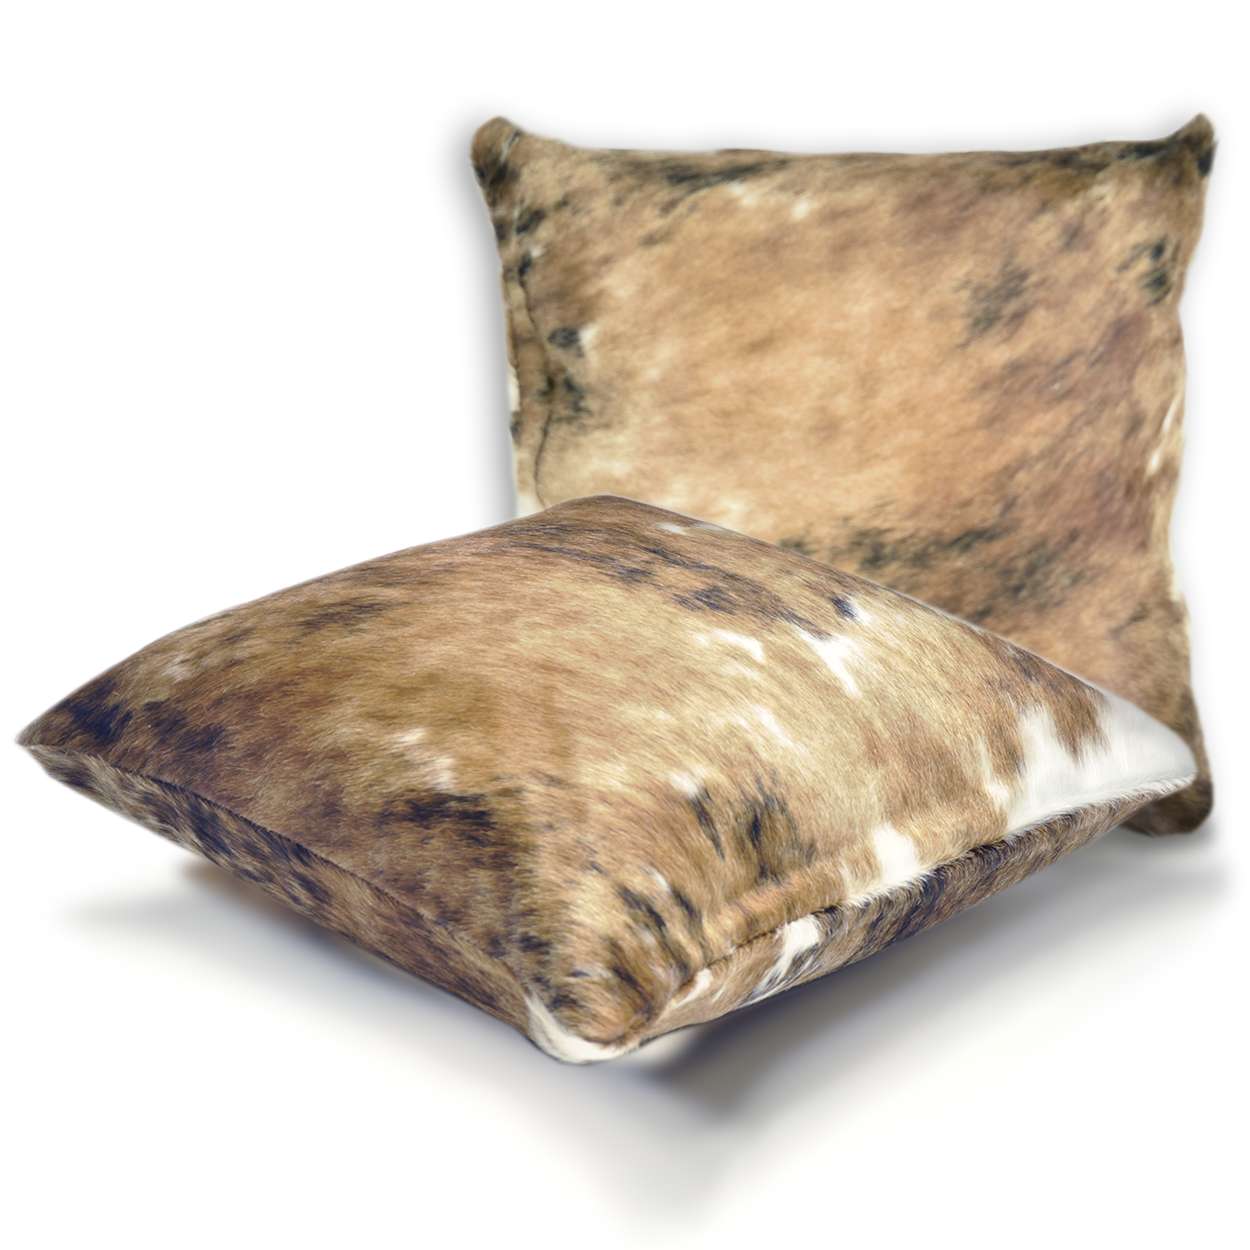 322074 - 20in Premium Cowhide Pillow - Tri-Color Brindle on Both Sides